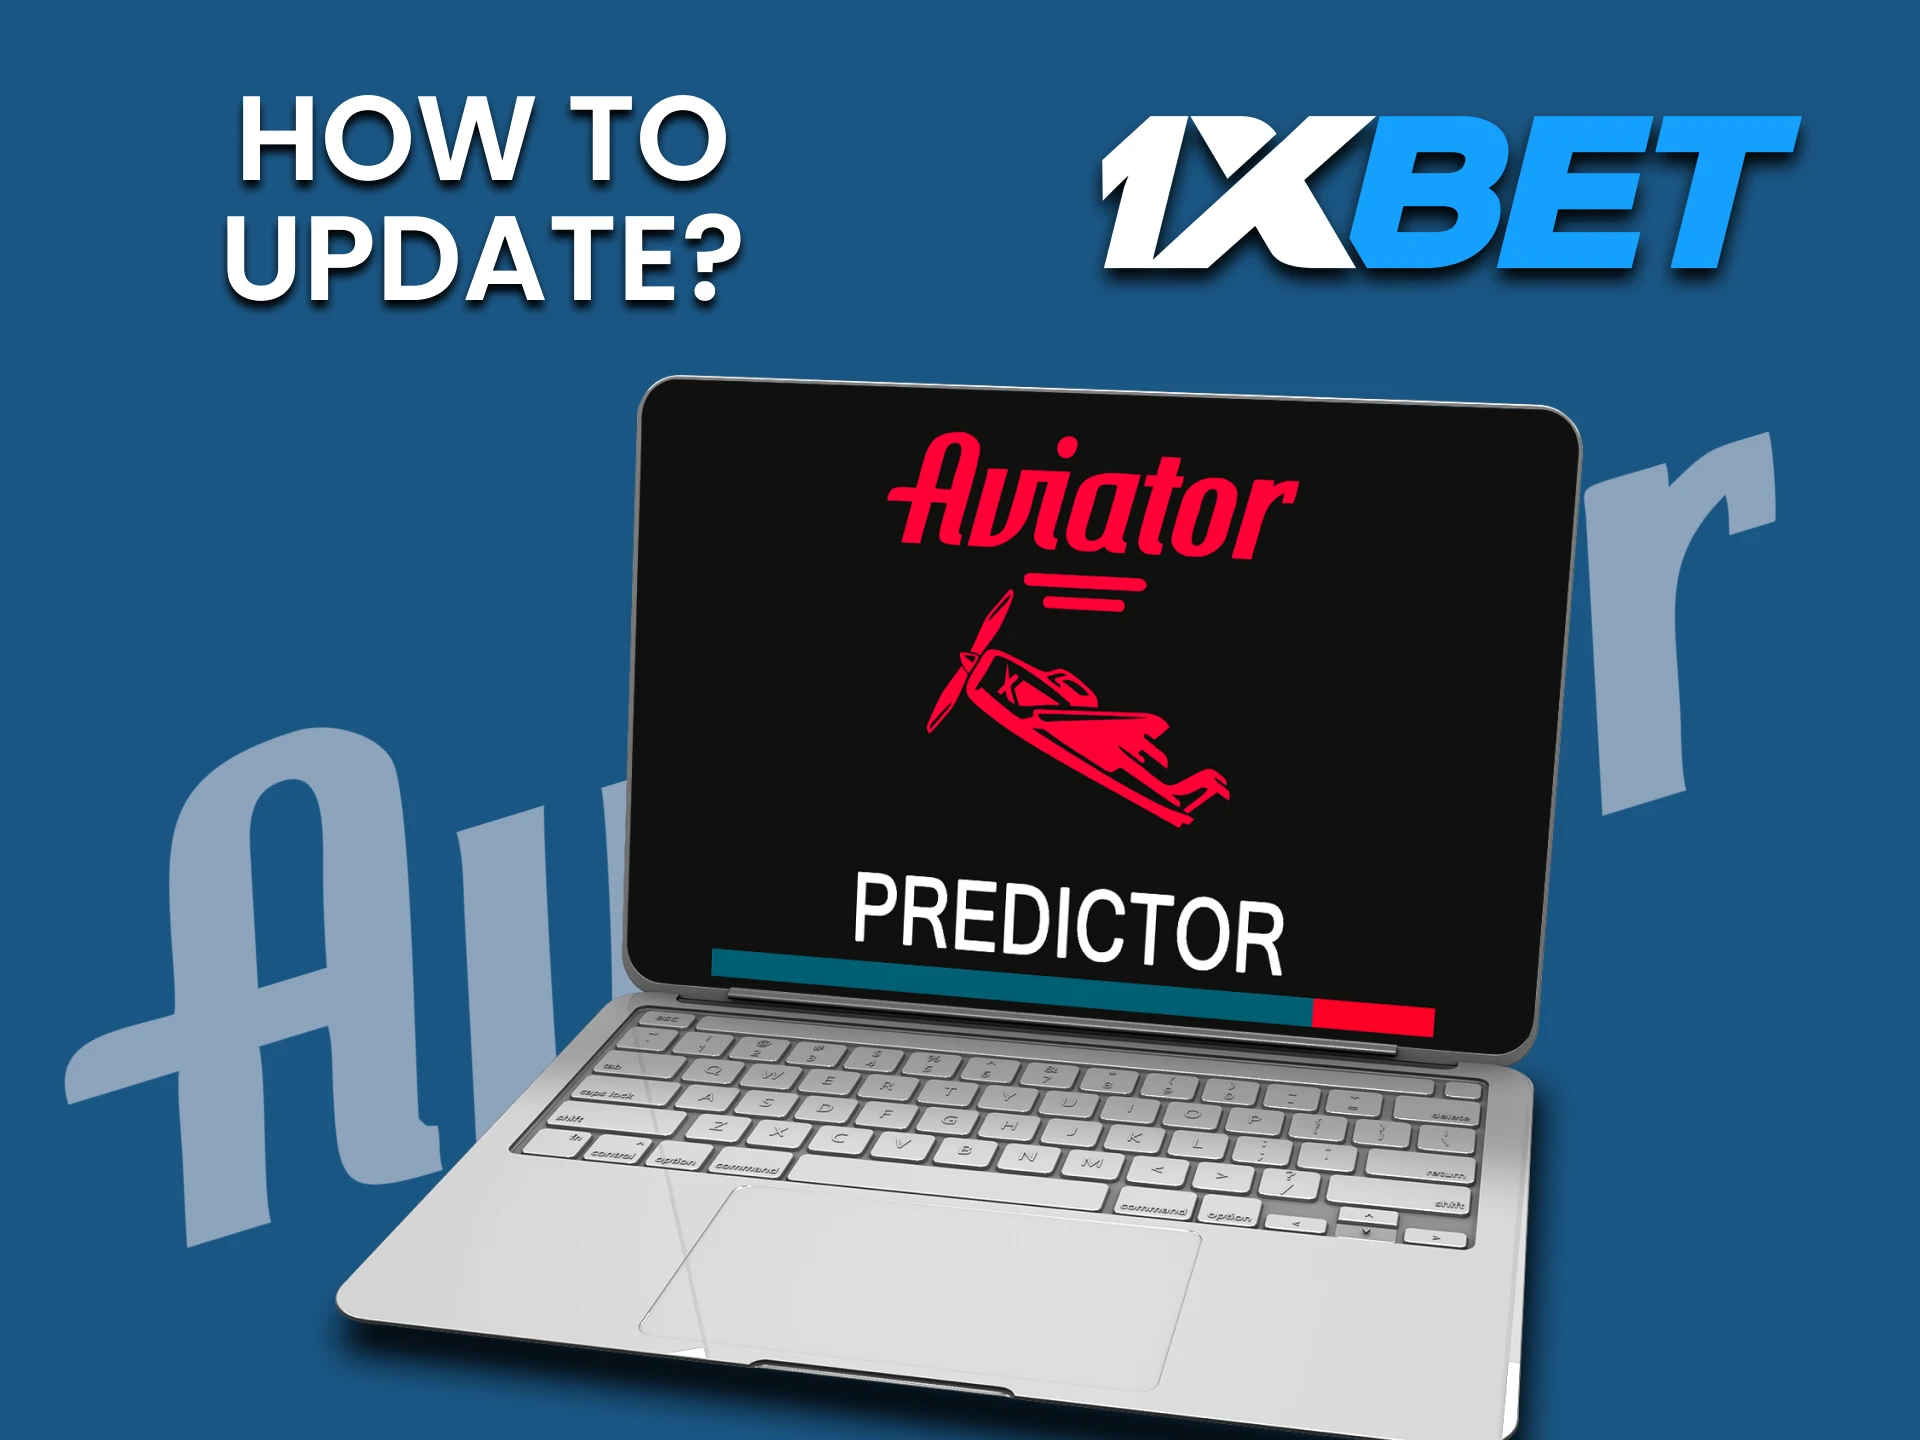 We will tell you how to update Predictor for the Aviator game on 1xbet.